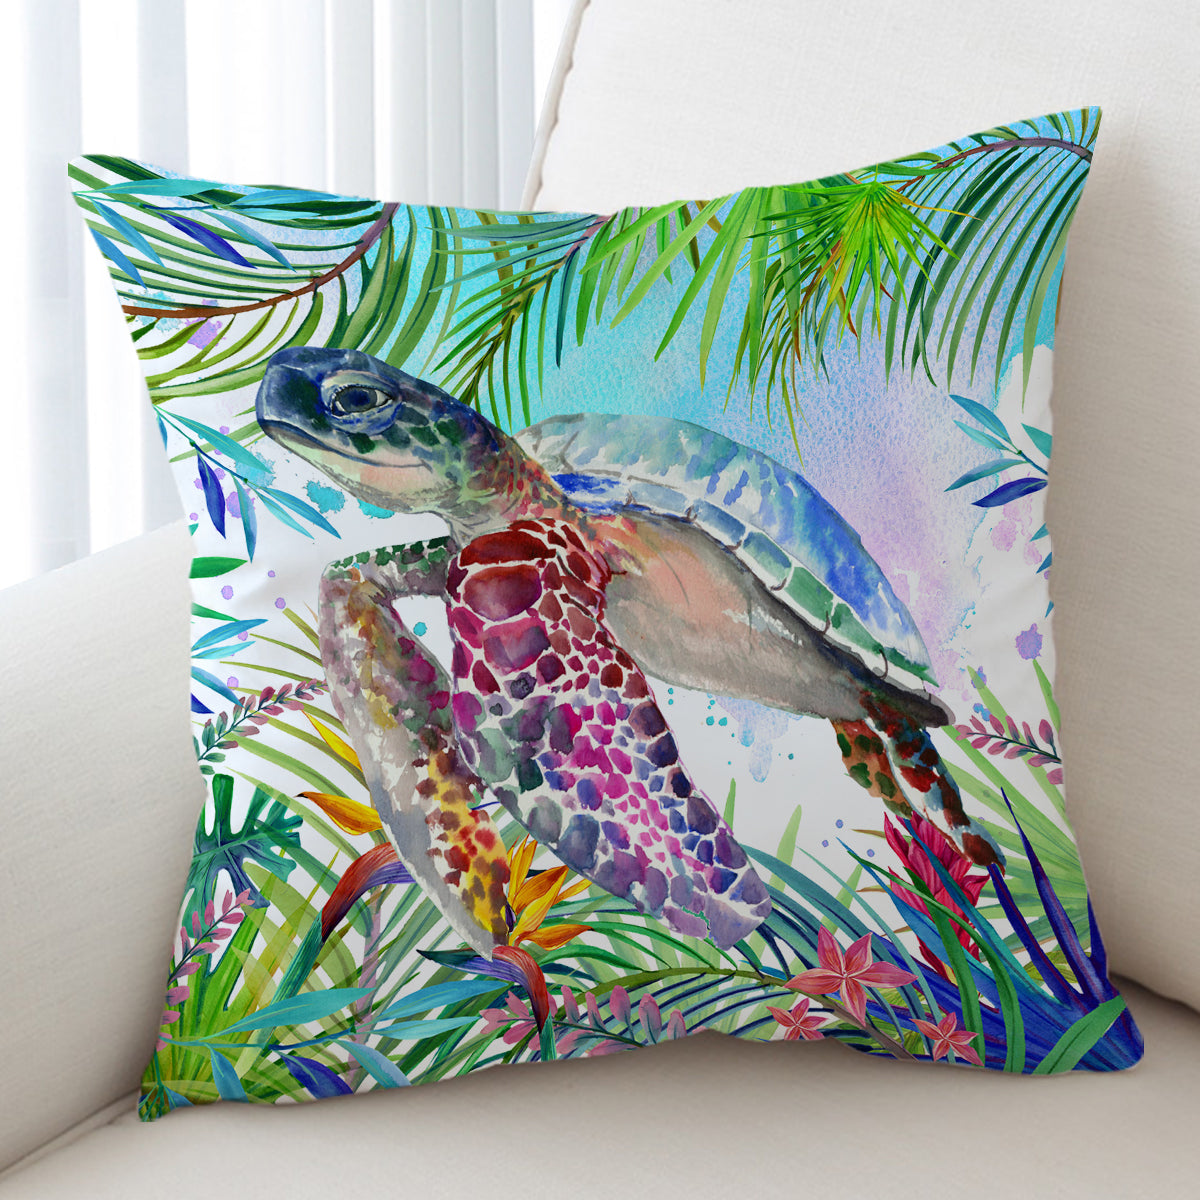 Tropical Sea Turtle Pillow Cover